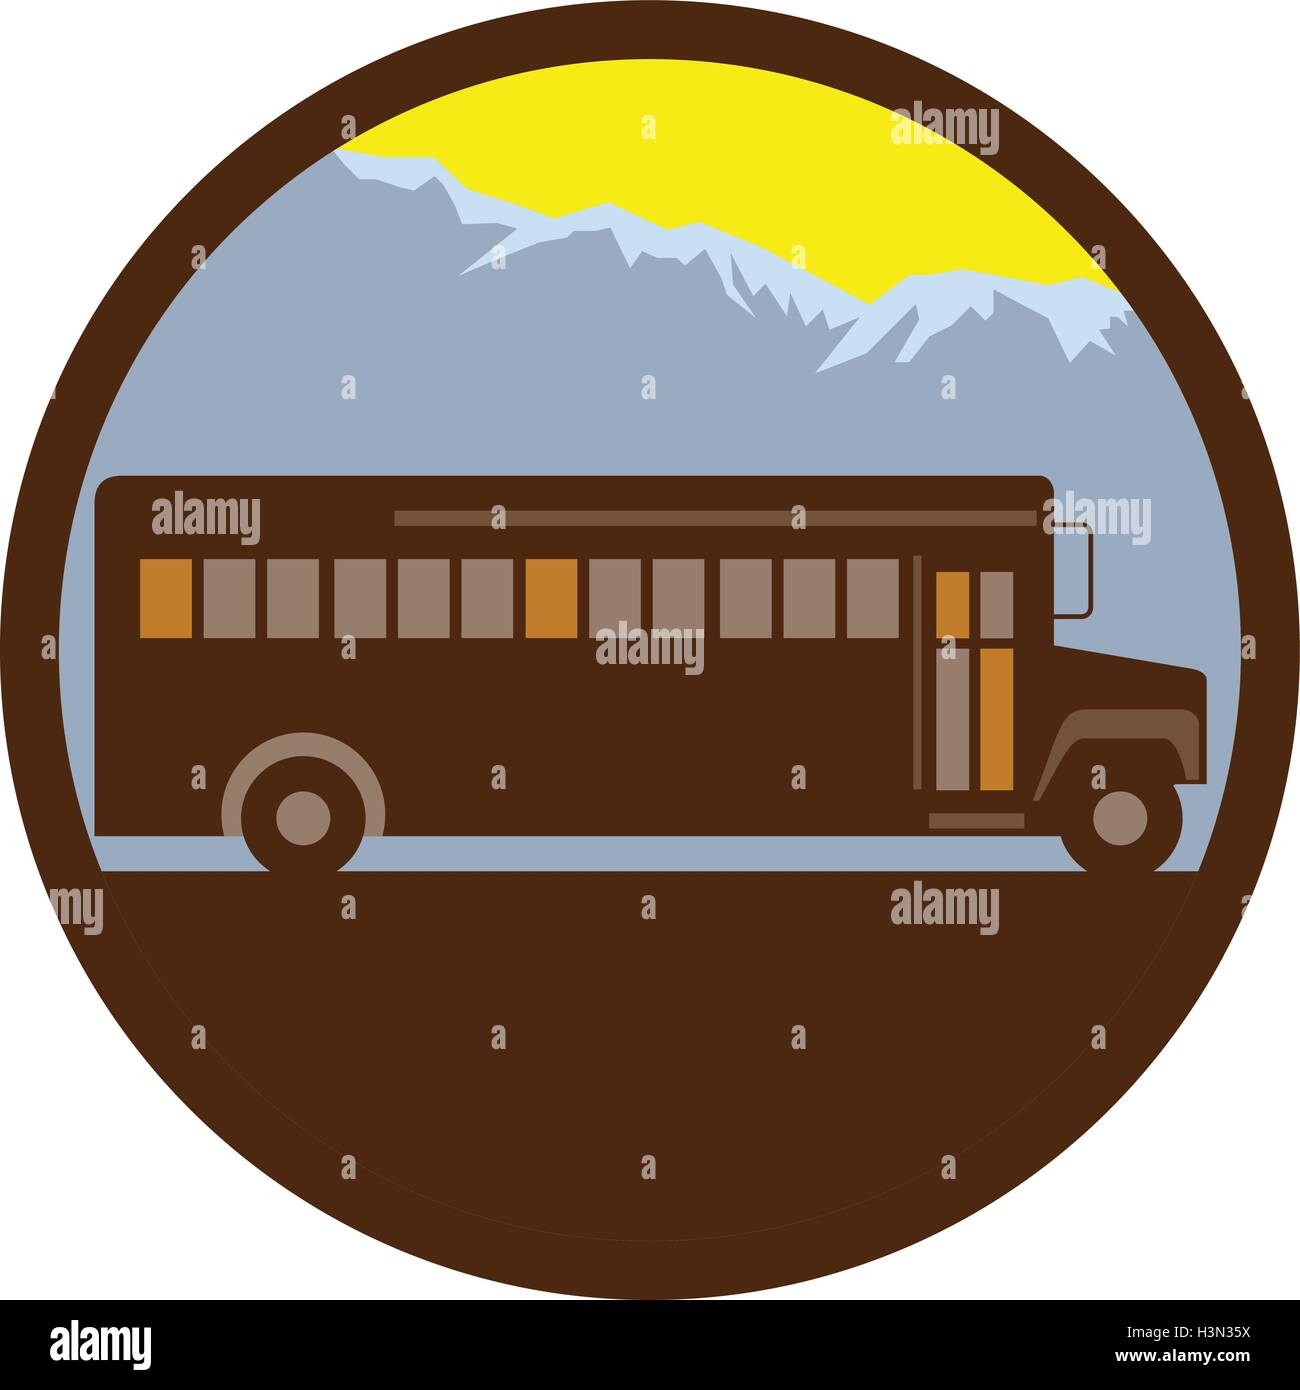 Illlustration of a vintage school bus viewed from the side with mountains in the background set inside circle done in retro style. Stock Vector